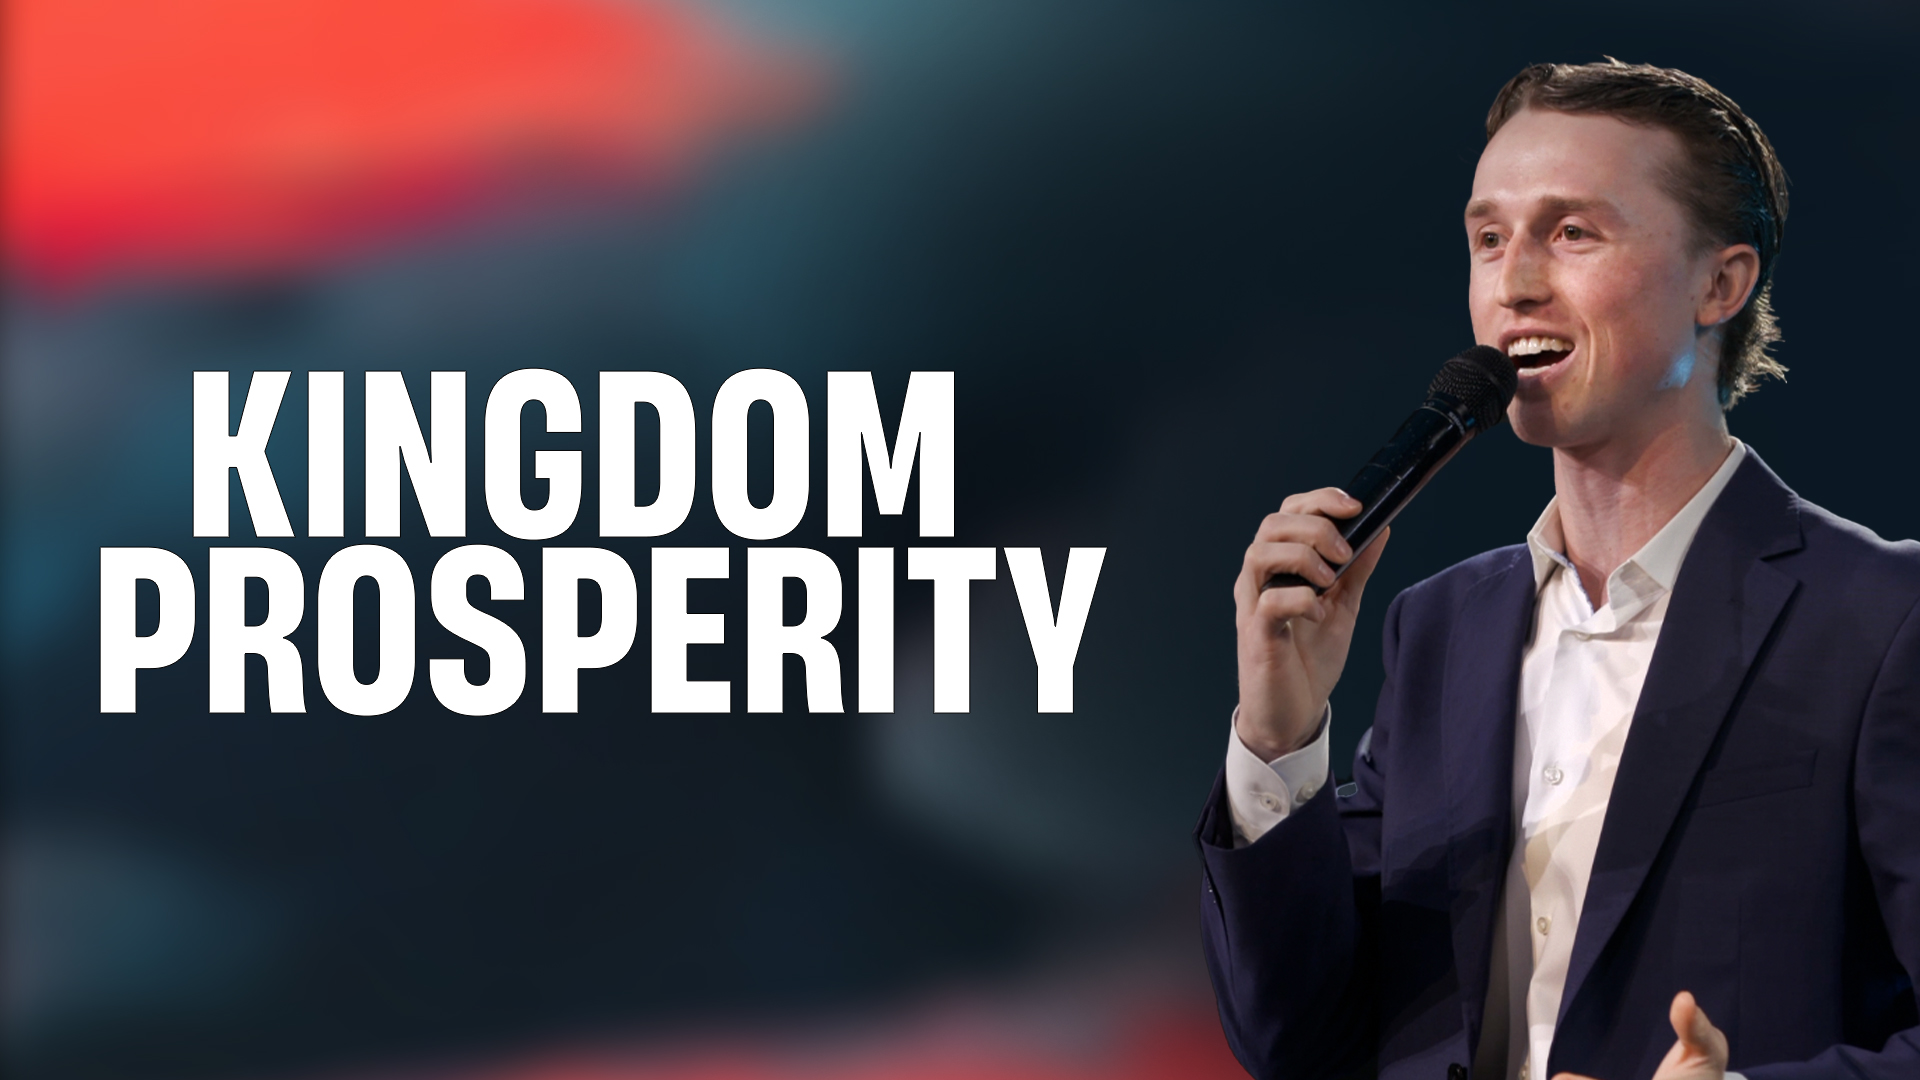 Featured Image for “Kingdom Prosperity”